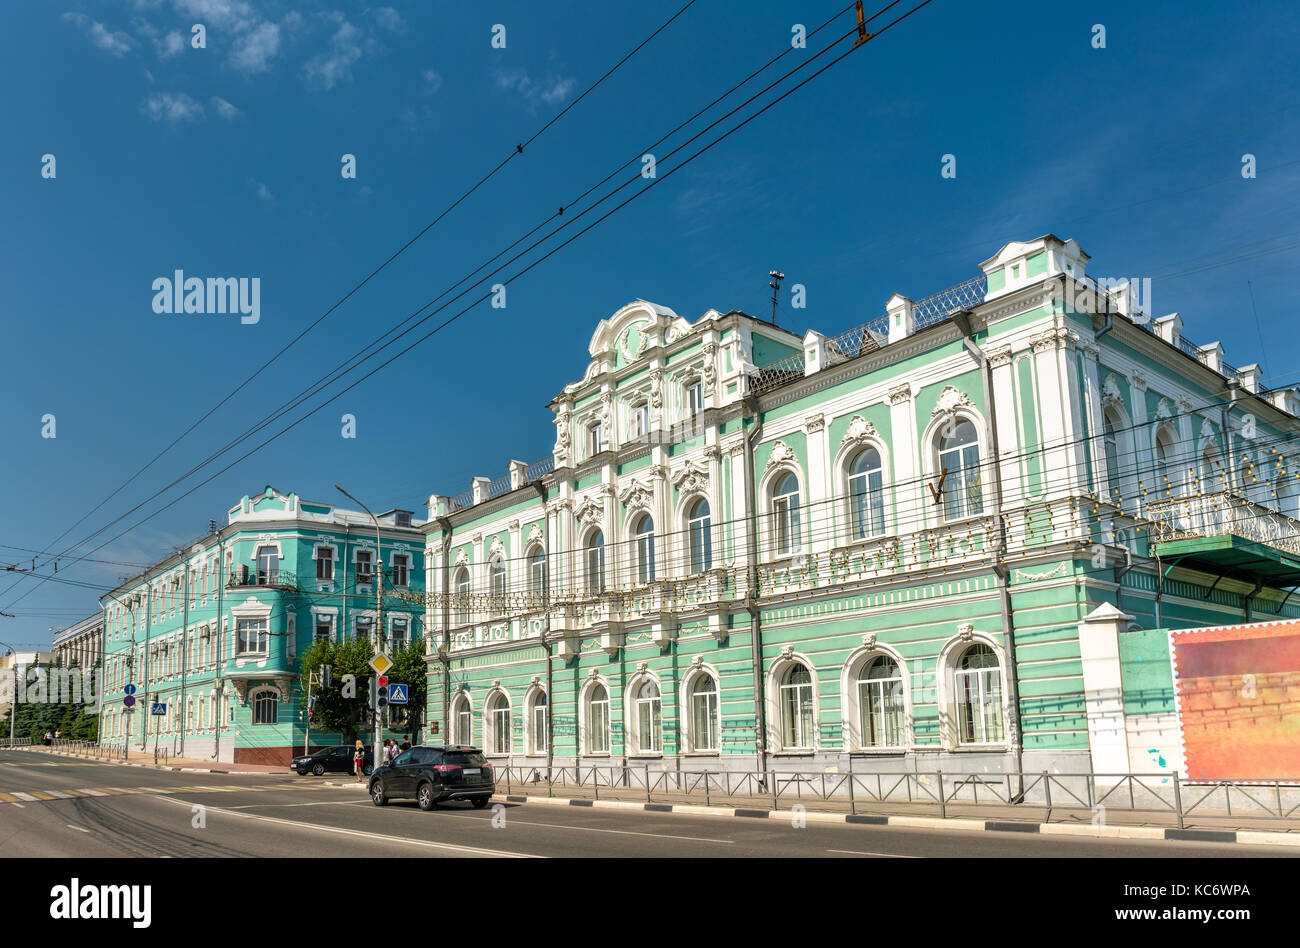 Arbitral tribunal building in the city centre of Ryazan, Russia Stock Photo